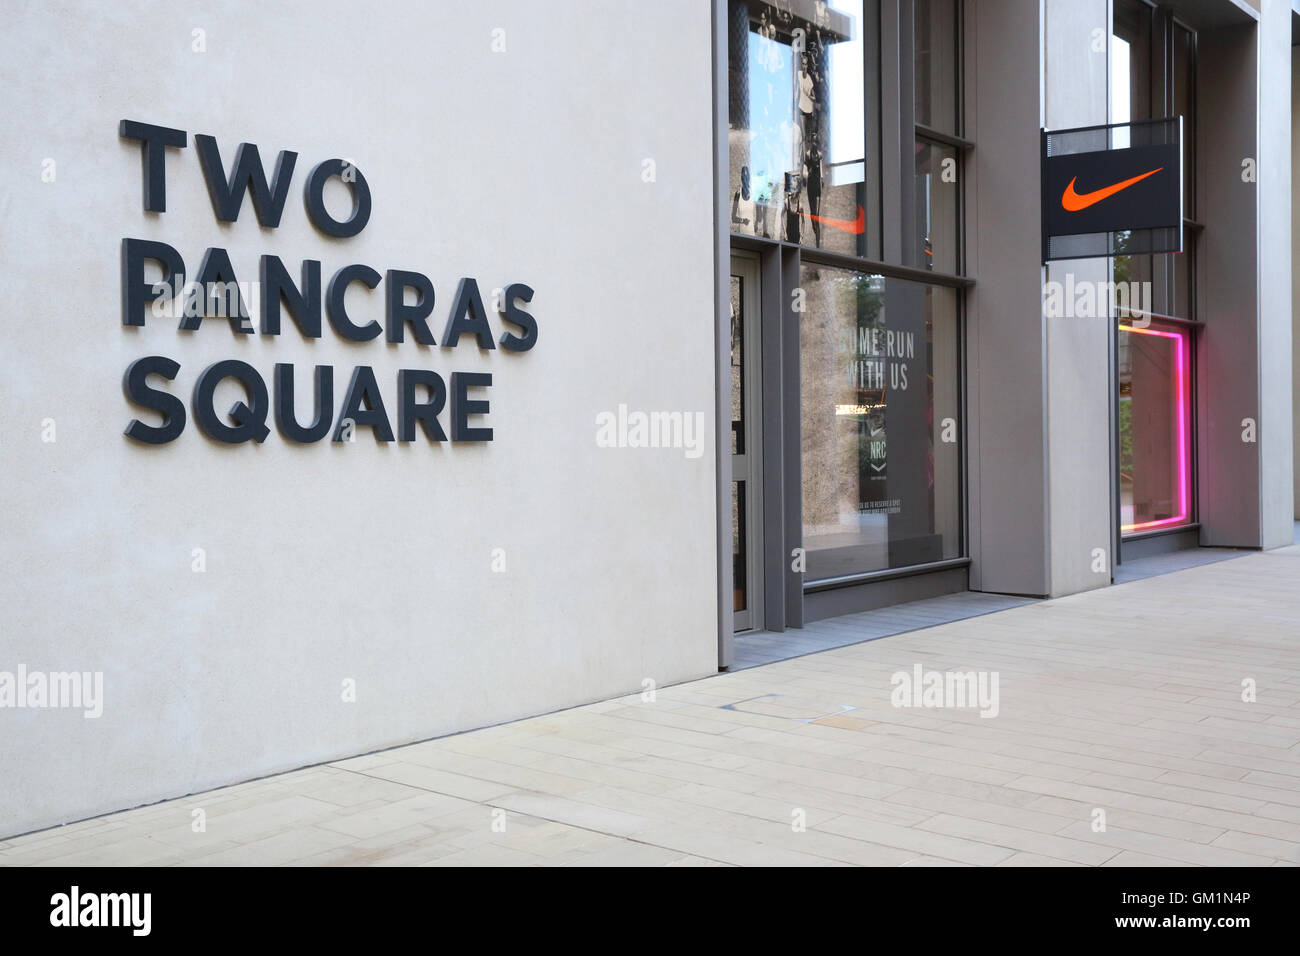 Nike sports superstore at 2 Pancras Square, at Kings Cross, north London,  England, UK Stock Photo - Alamy